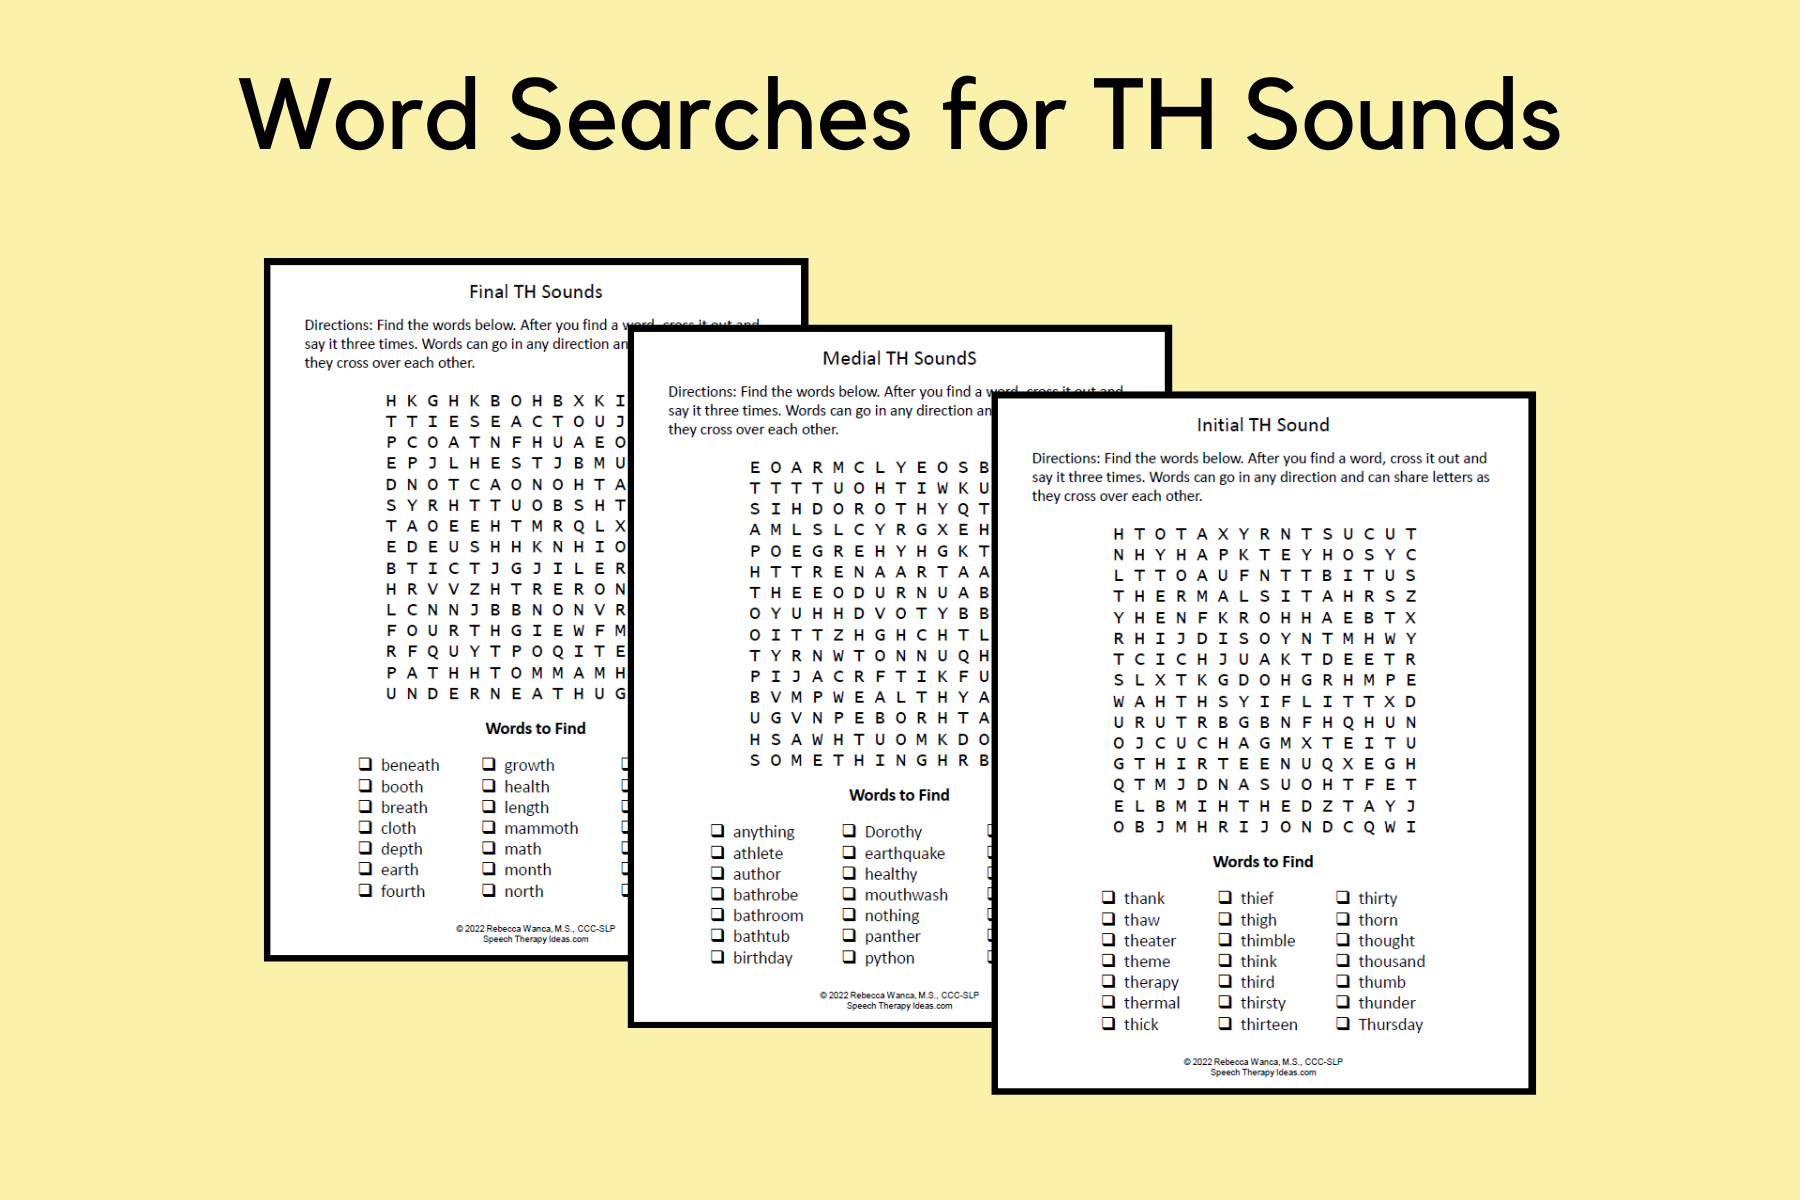 Word Searches for TH Sounds